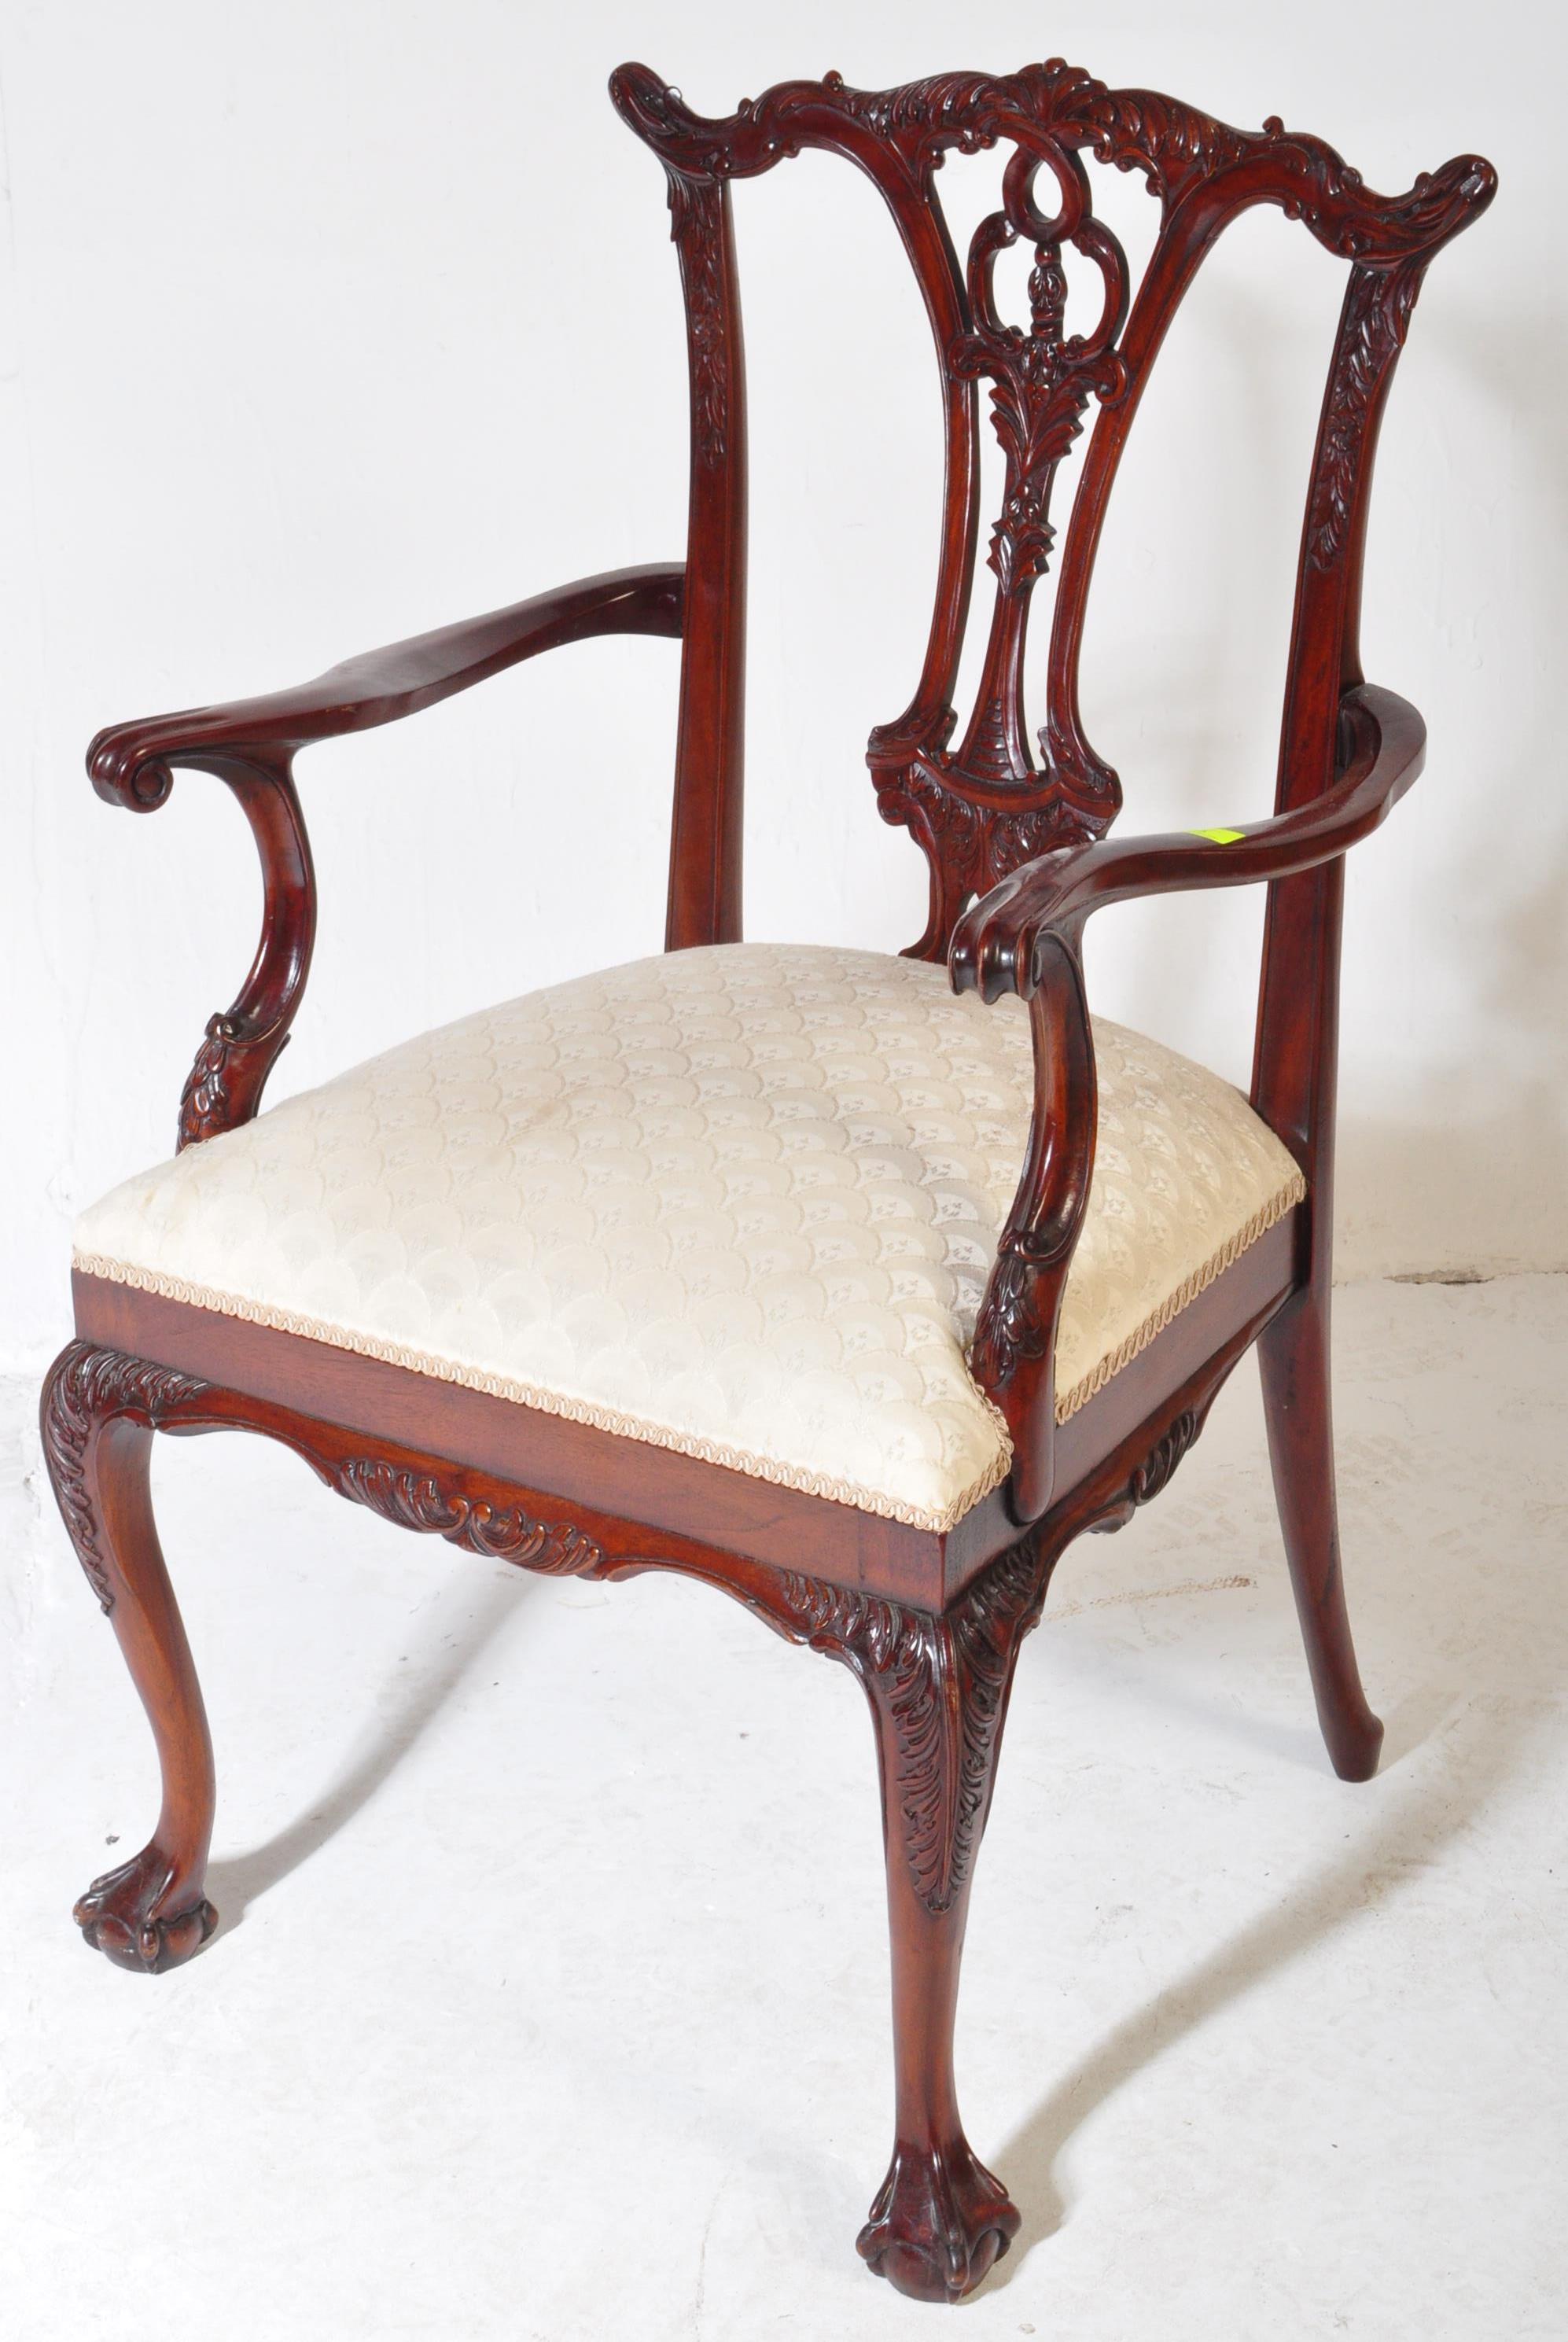 EARLY 20TH CENTURY MAHOGANY CHIPPENDALE STYLE DESK CHAIR - Image 2 of 5